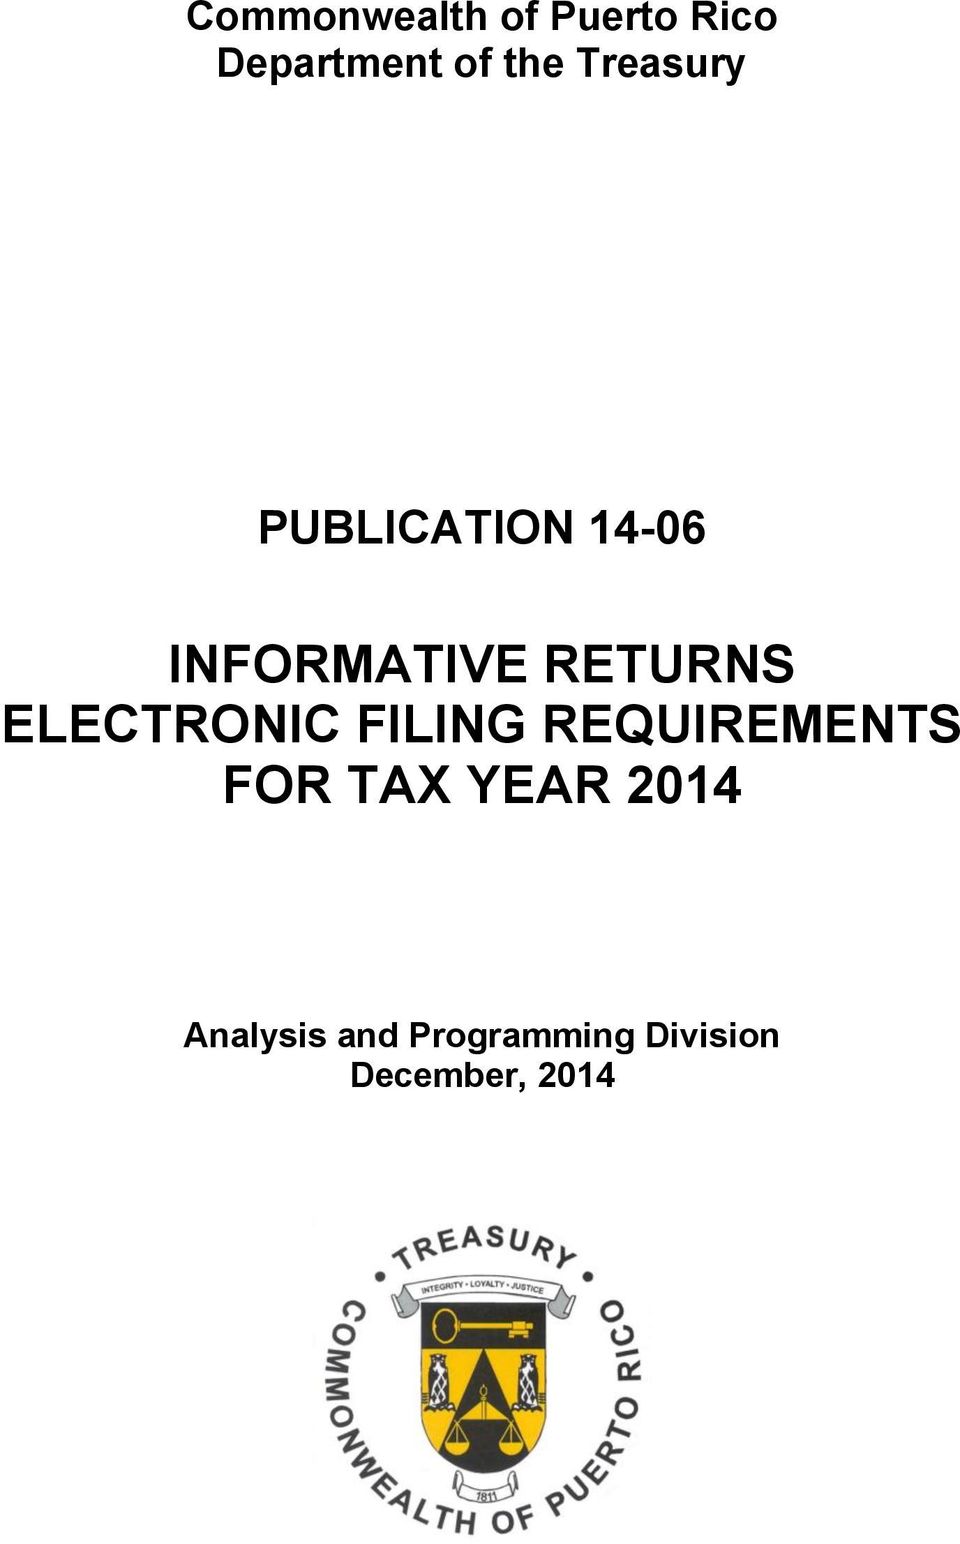 ELECTRONIC FILING REQUIREMENTS FOR TAX YEAR